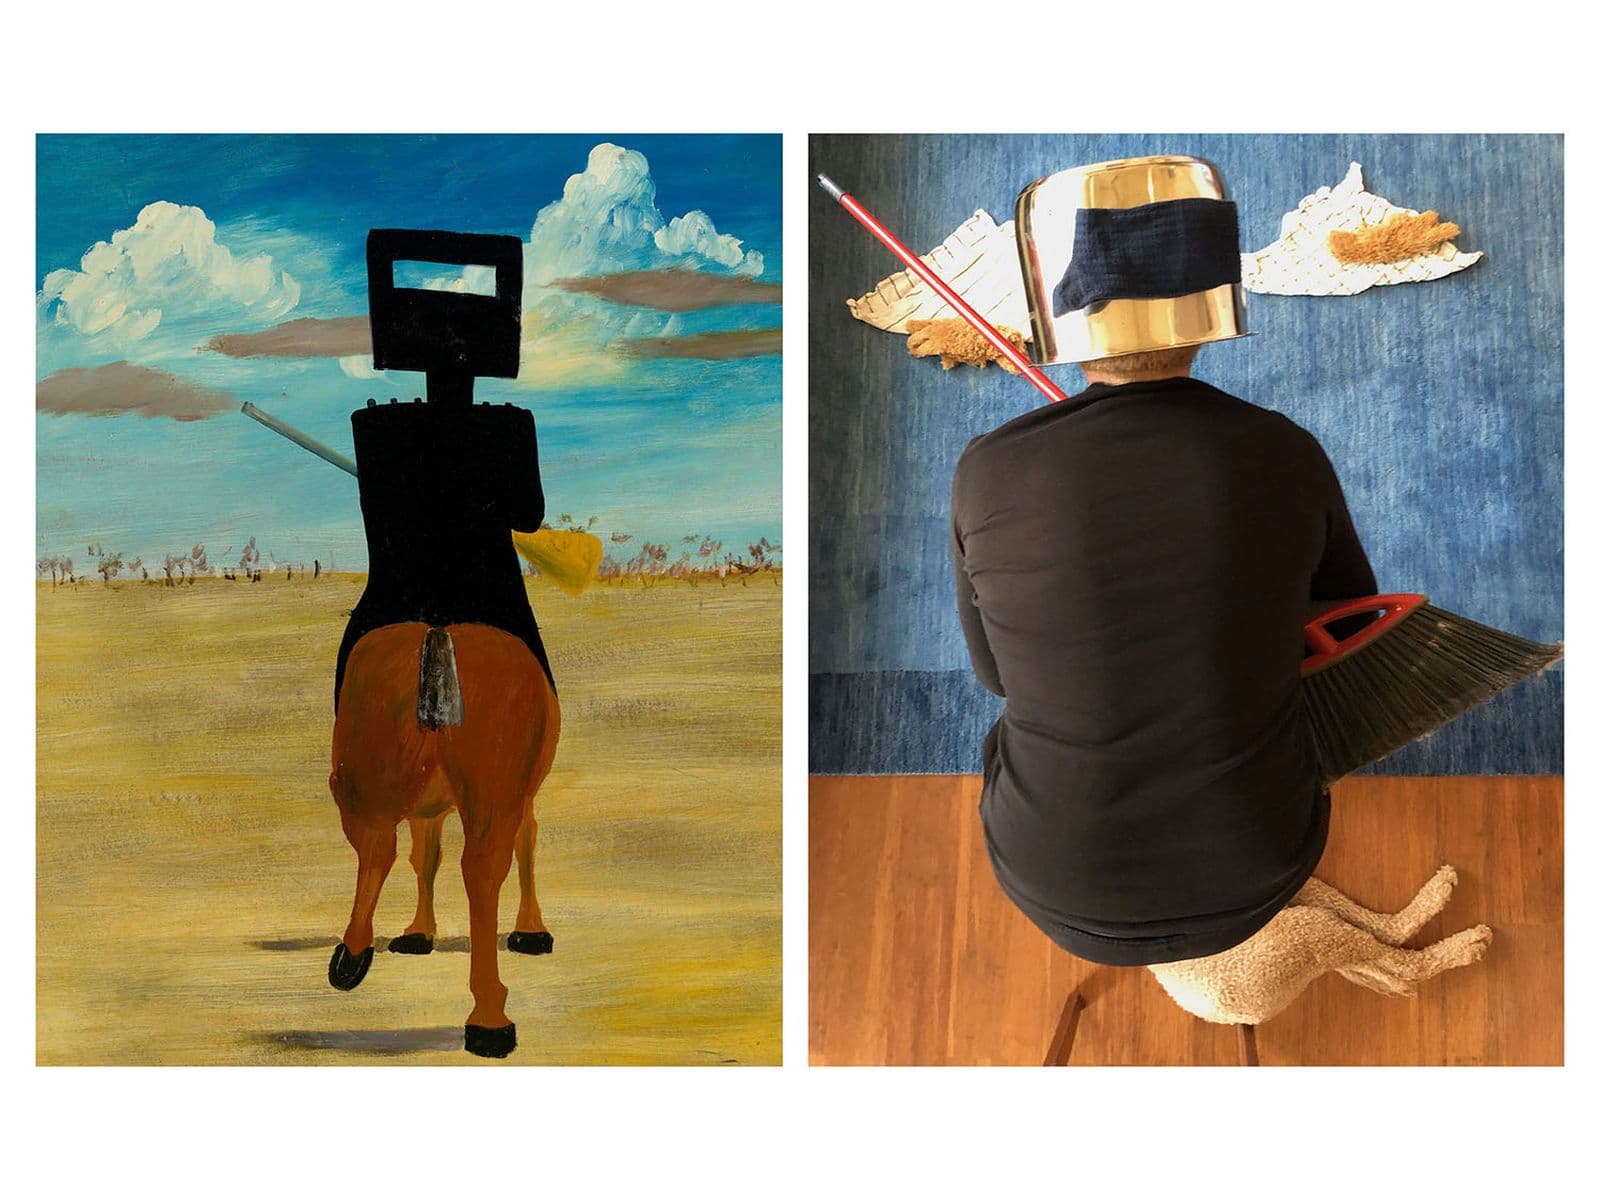 Two images. On the left is a figure in a square helmet riding a horse while the right attempts to recreate the image.